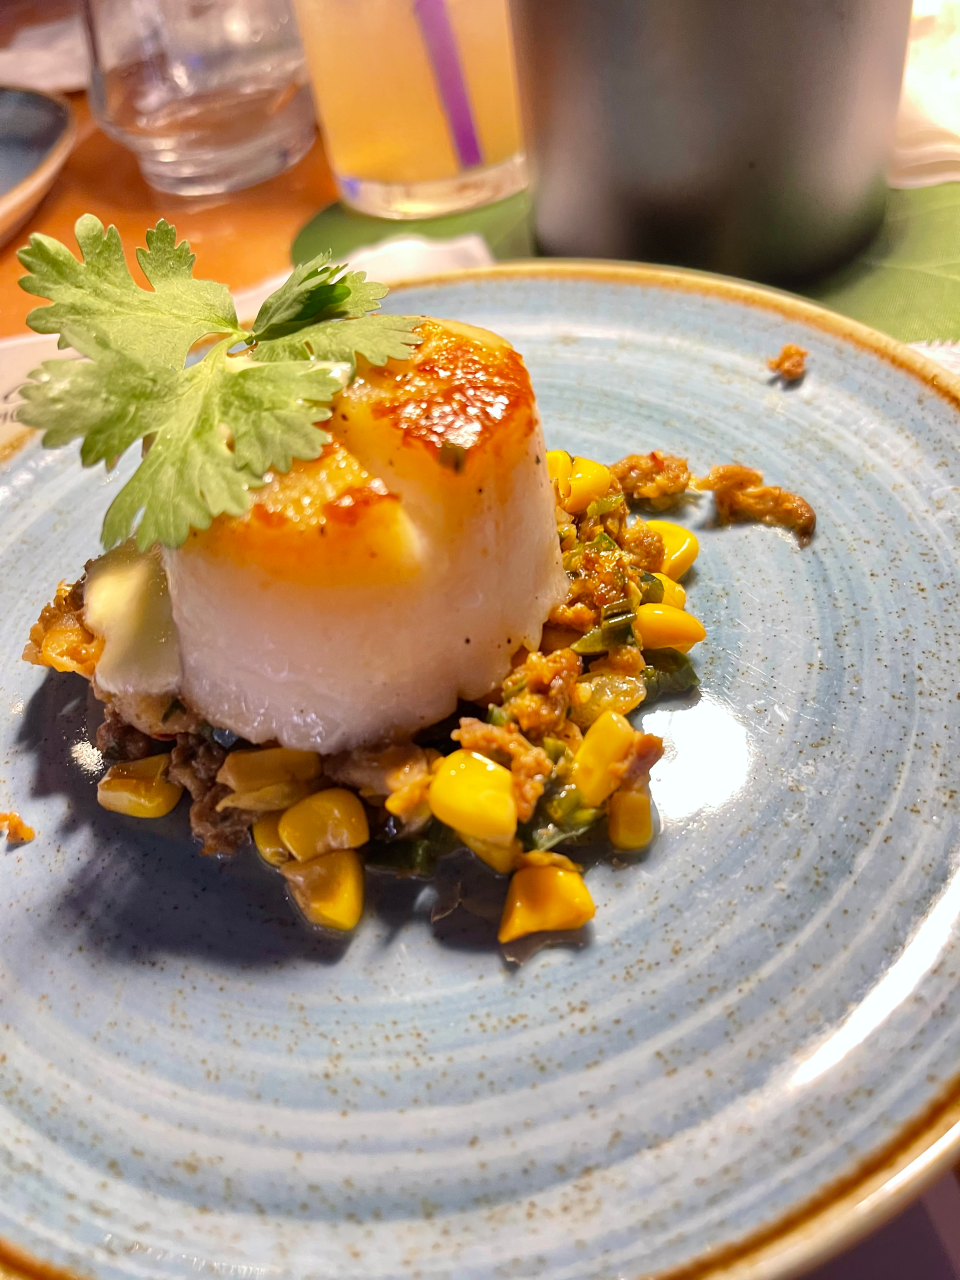 Kolucan Mexican Bar and Grill, a new restaurant in Sarasota offering an "elevated approach to traditional Mexican dishes" such as the Callo de Hacha de Colima (pan-seared sea scallops with street corn huitlachoche risotto) pictured here, will open Thursday, Aug. 31.